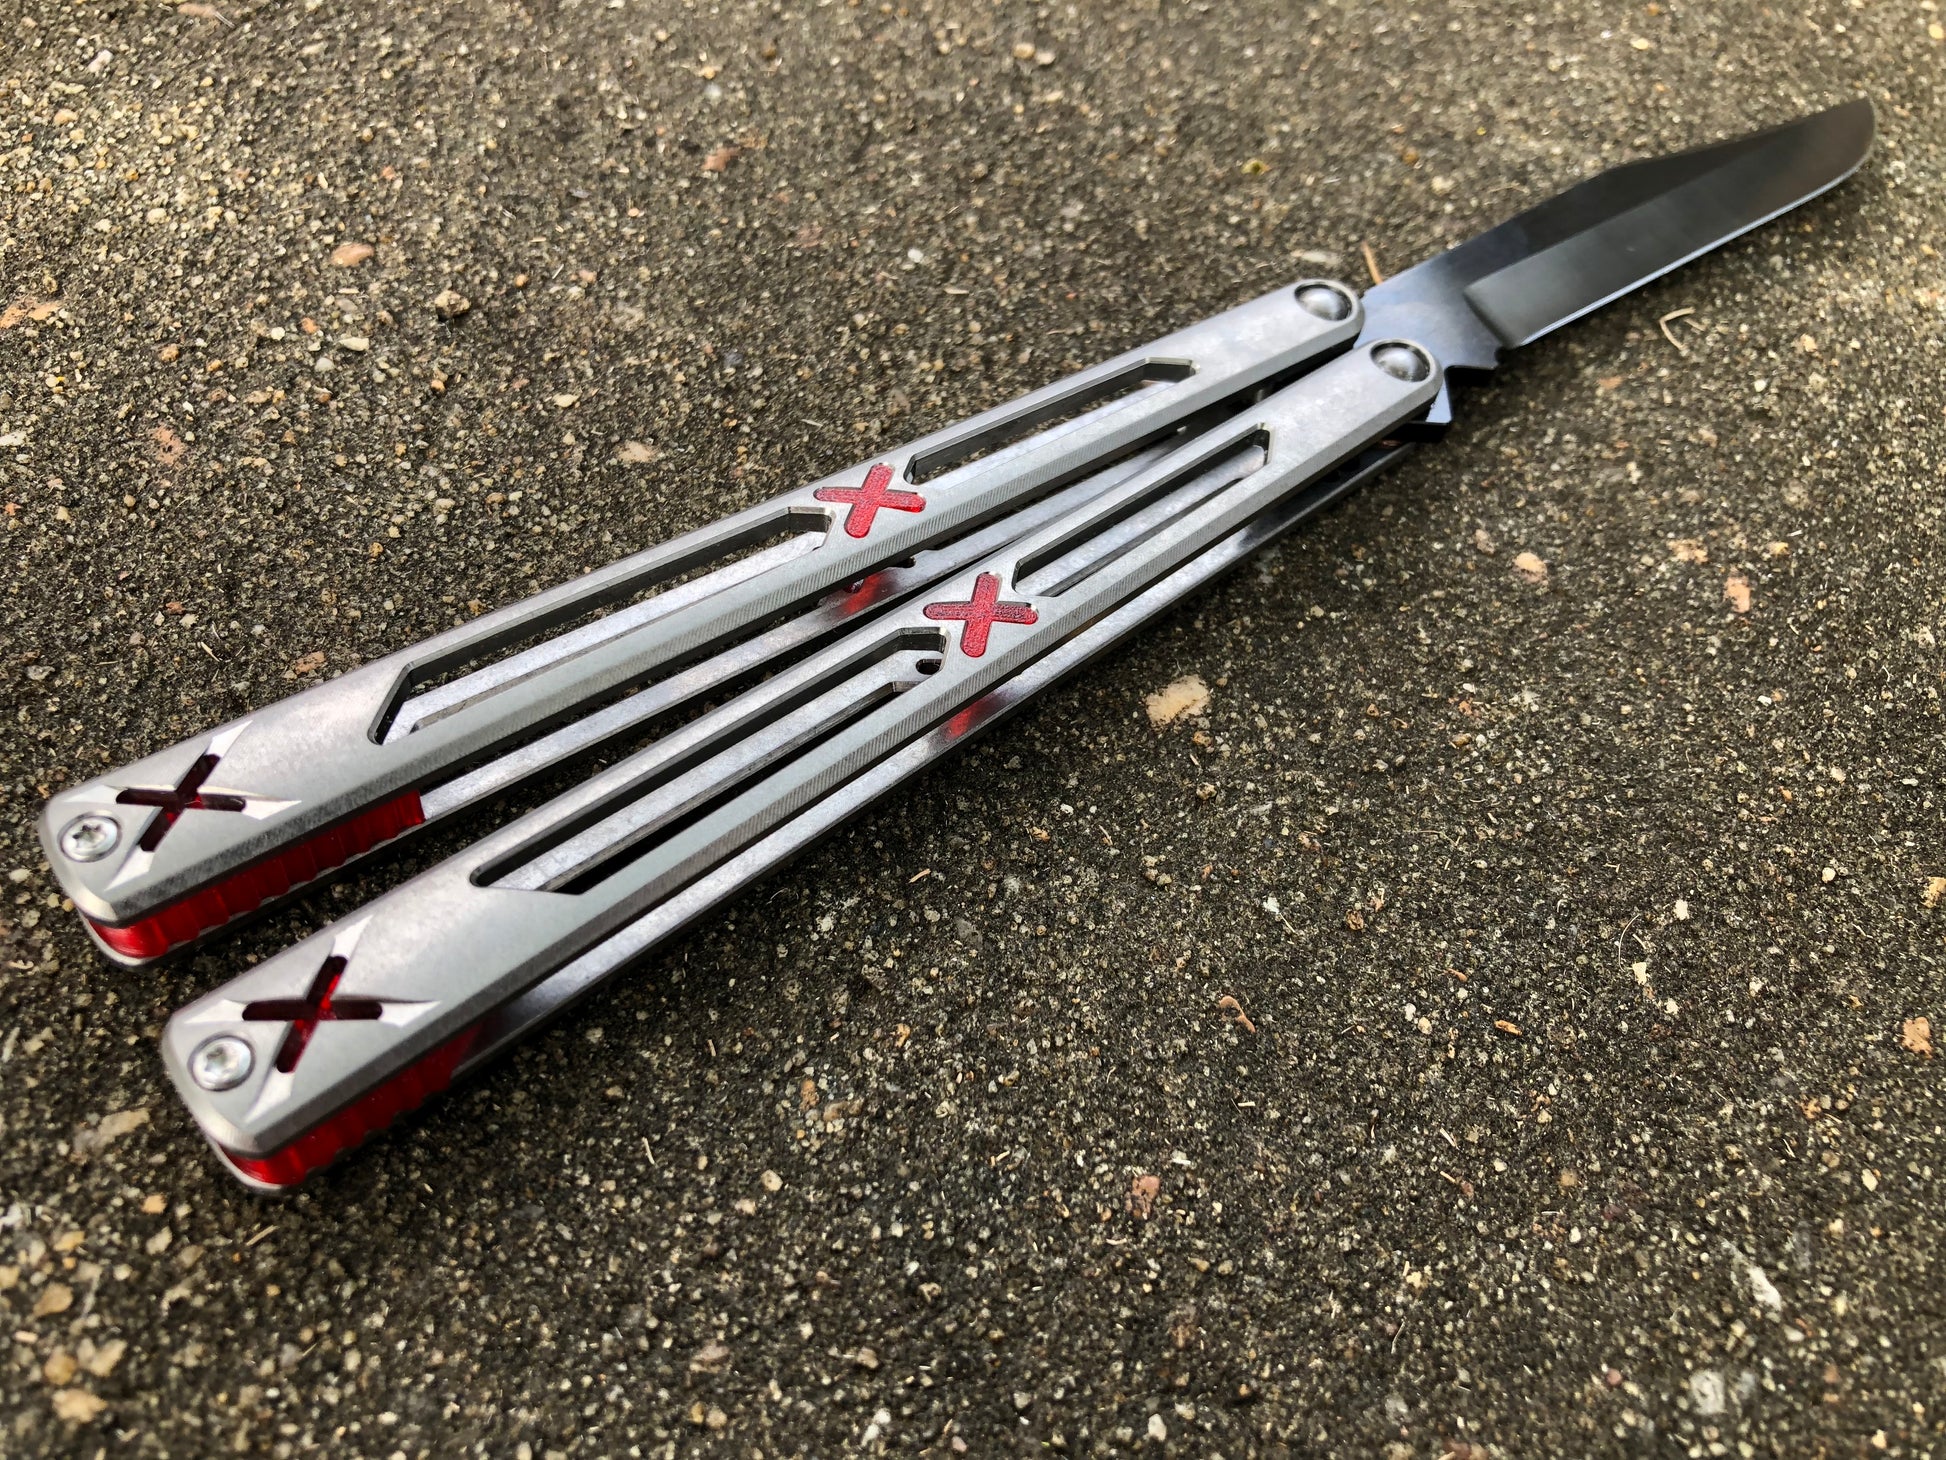 Made by Bxndxge Knives (Bandage, not bondage!) in collaboration with Zippy, the "Stitch" handles are a Titanium rehandle mod compatible with blades from both the BRS Replicant and Squid Industries Krake Raken balisongs.